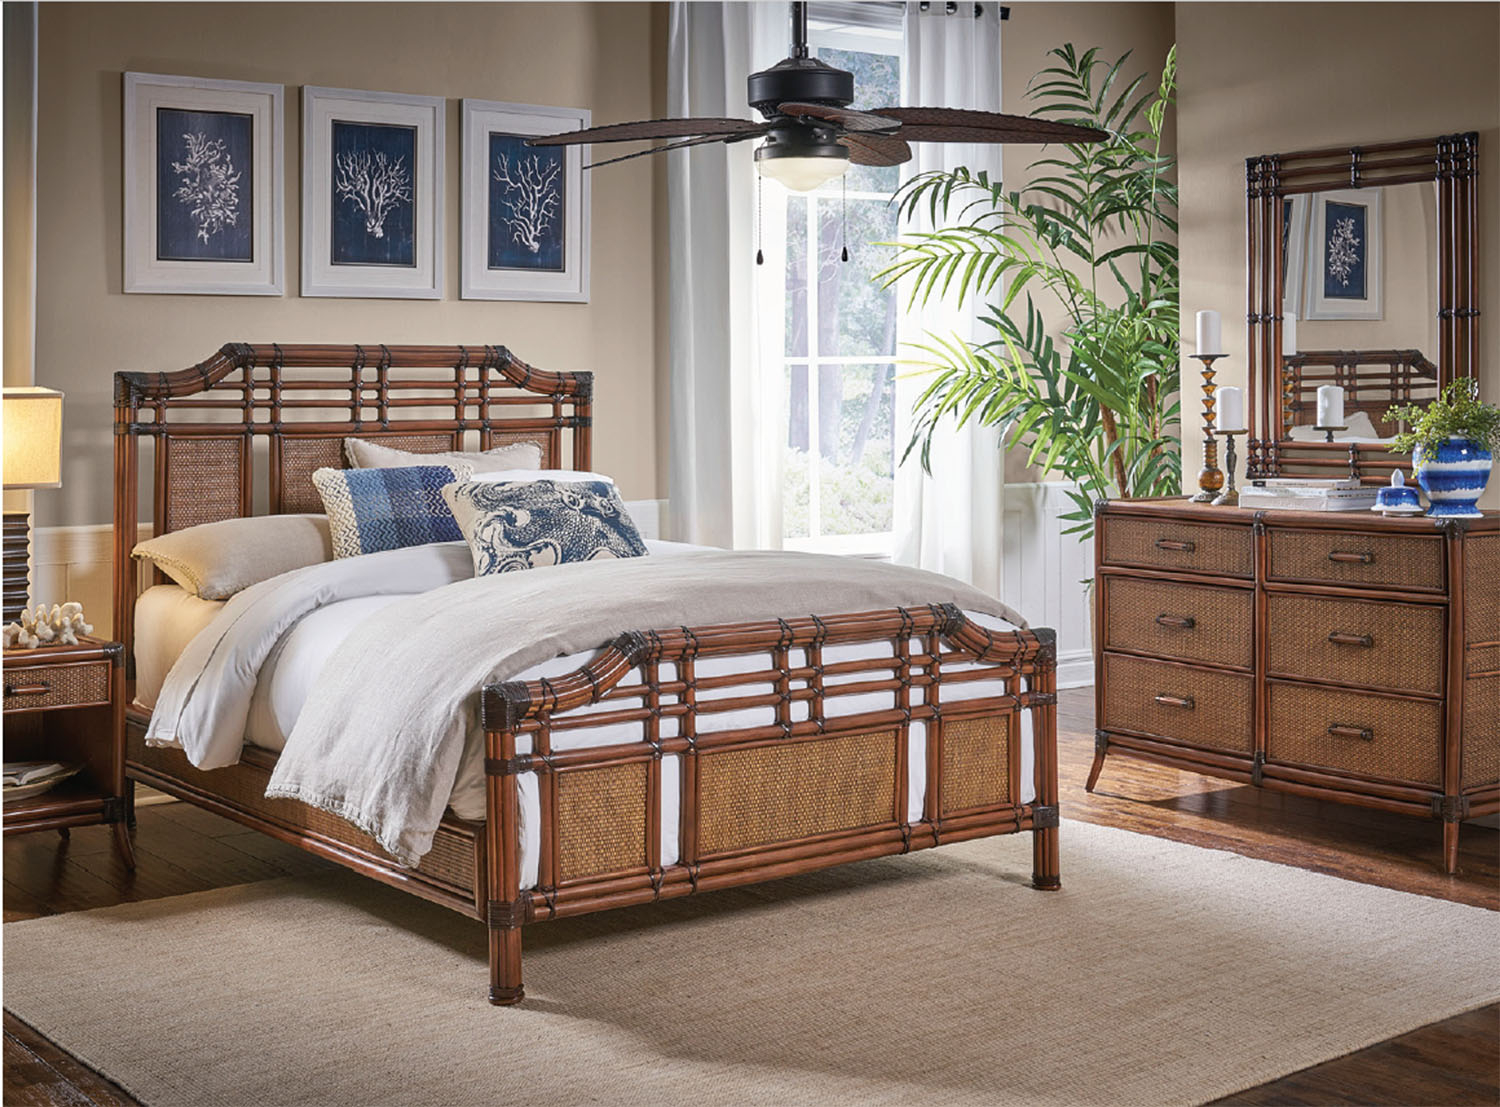 Palm Cove 6 Piece Queen Rattan Wicker Bedroom Set Model 1102 5643 Atq 6bq From Panama Jack throughout dimensions 1500 X 1107